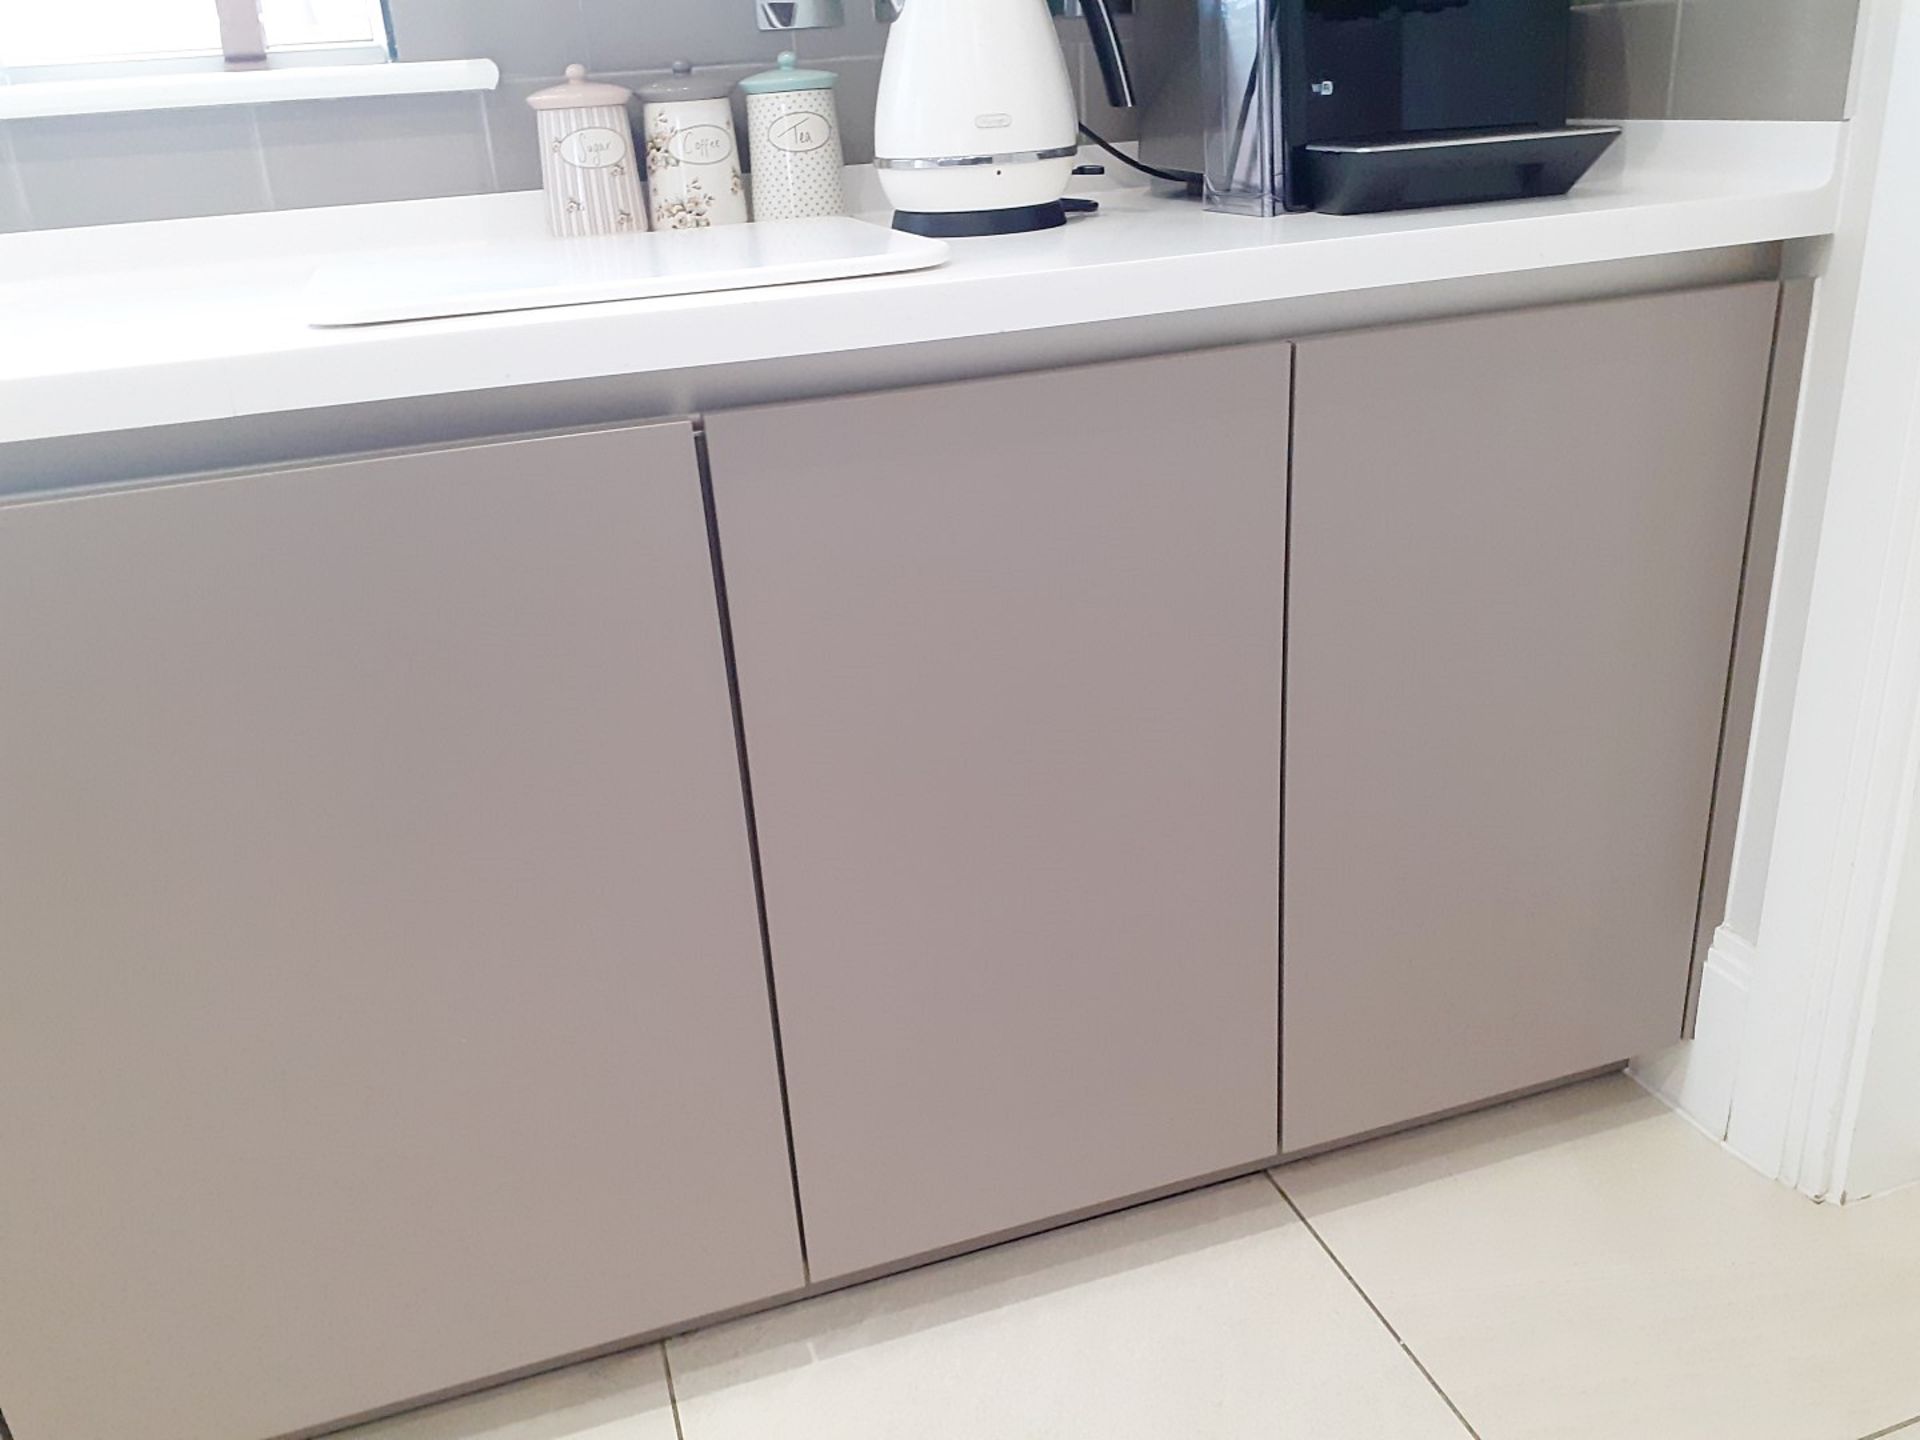 1 x SieMatic Handleless Fitted Kitchen With Intergrated NEFF Appliances, Corian Worktops And Island - Image 68 of 92